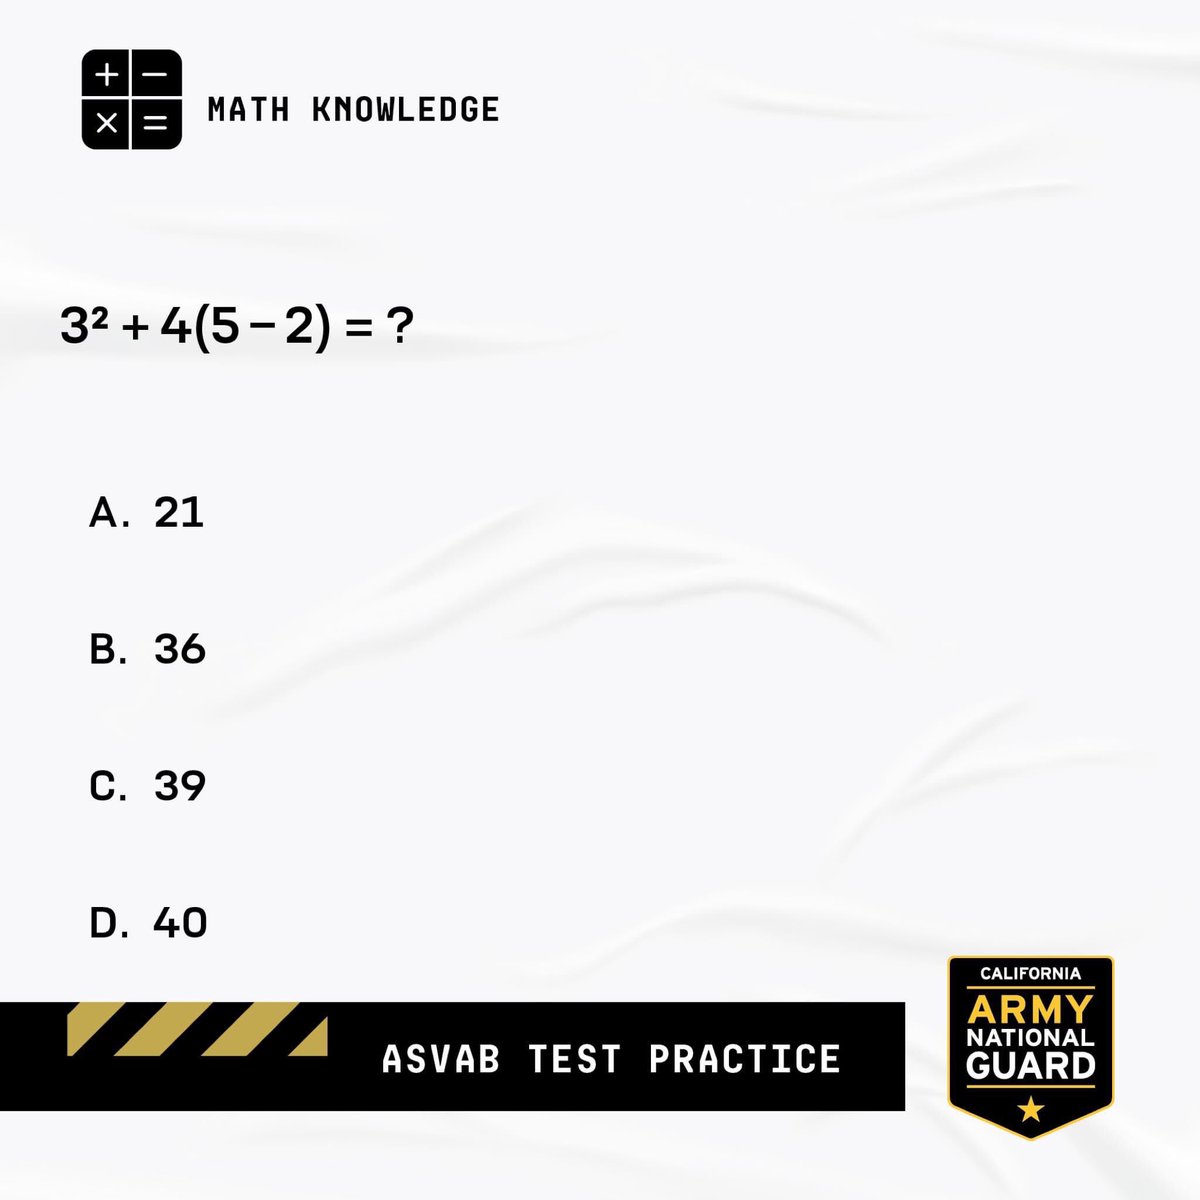 School is back in session! 📚 Brush up on your skills with this ASVAB question and prepare to sit for the real test: bit.ly/2kncFOq